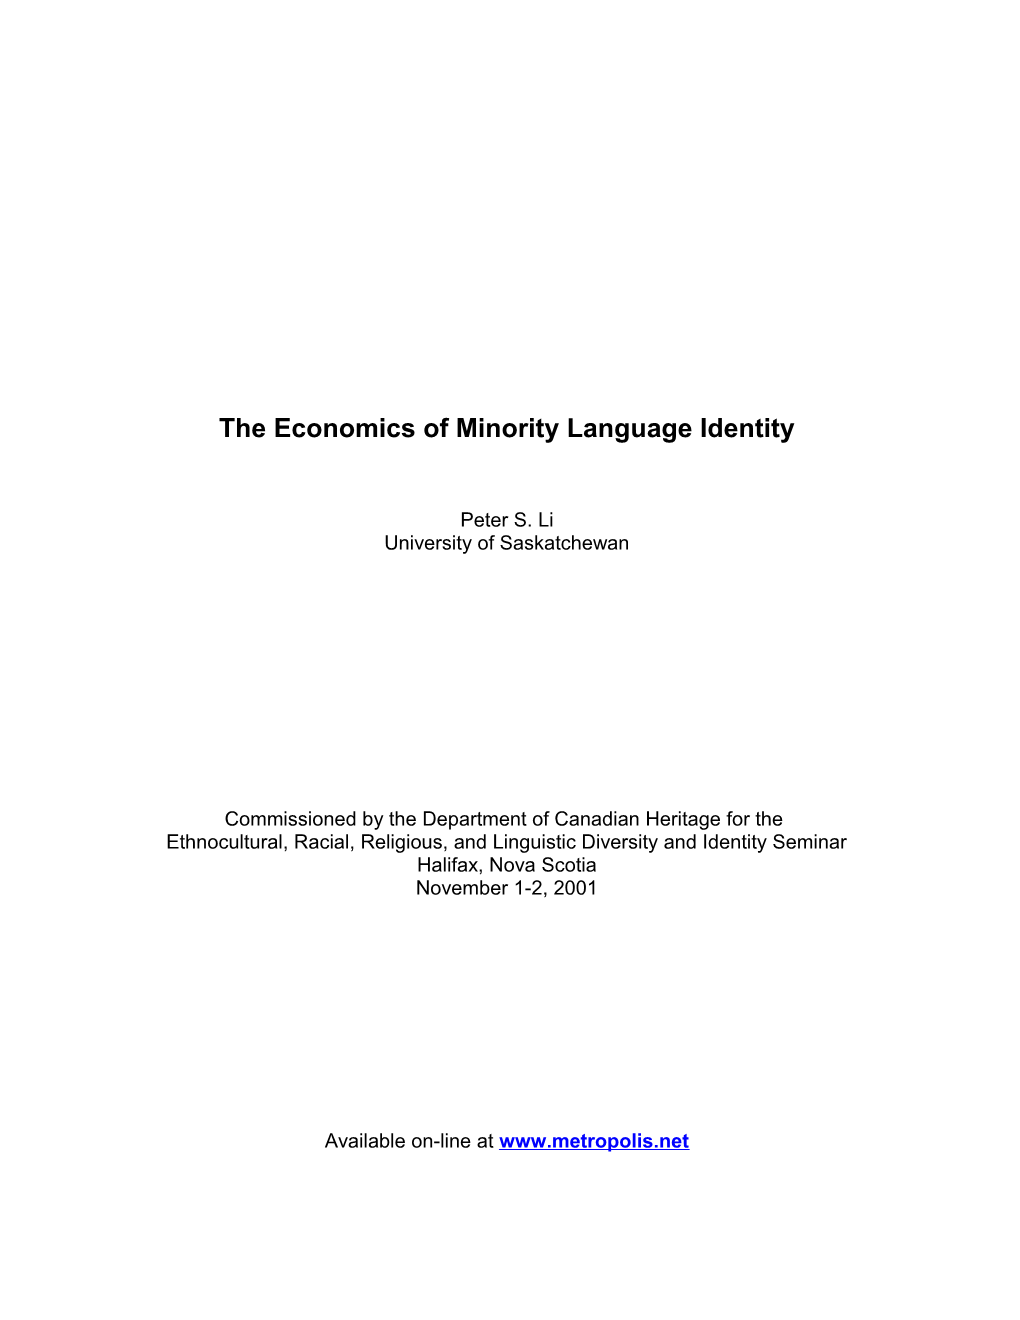 The Market Value of Non-Official Languages: Language Identity And